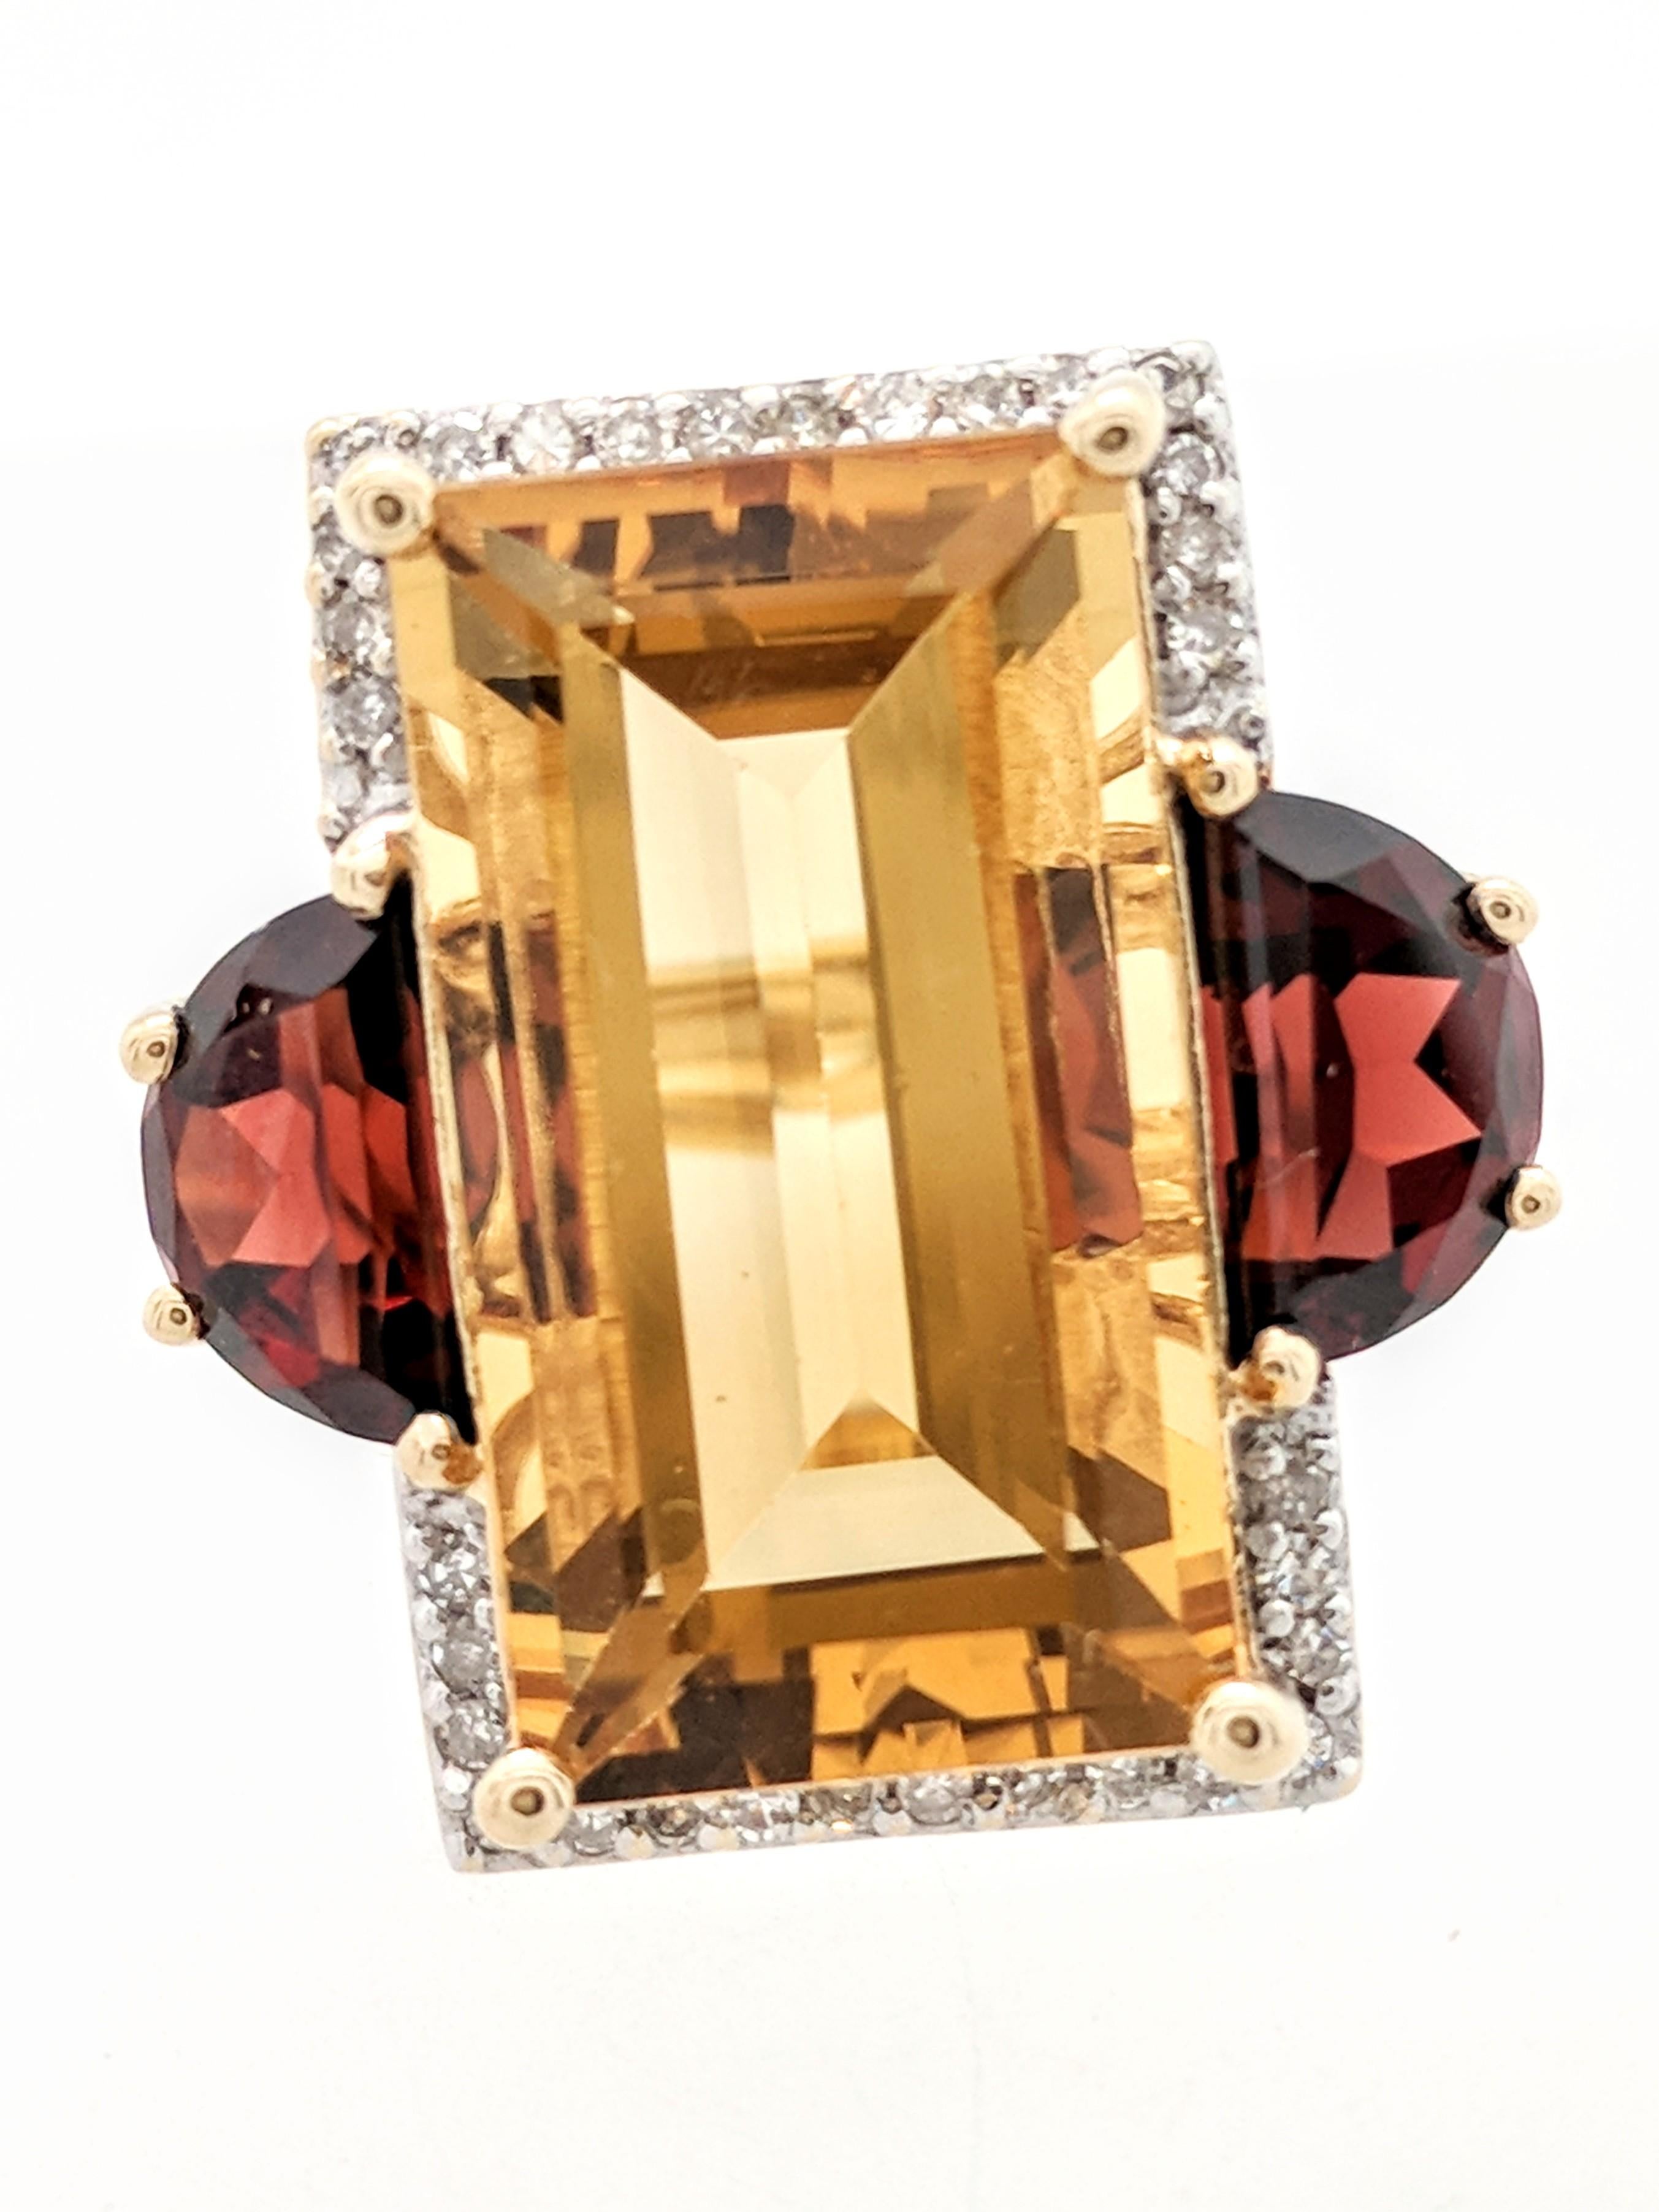 You are viewing a beautiful citrine, garnet and diamond right hand ring. Any woman would love to add this piece to their collection! This ring is crafted from 14k yellow gold and weighs 7.7 grams. It features approximately (1) 18x10mm emerald cut